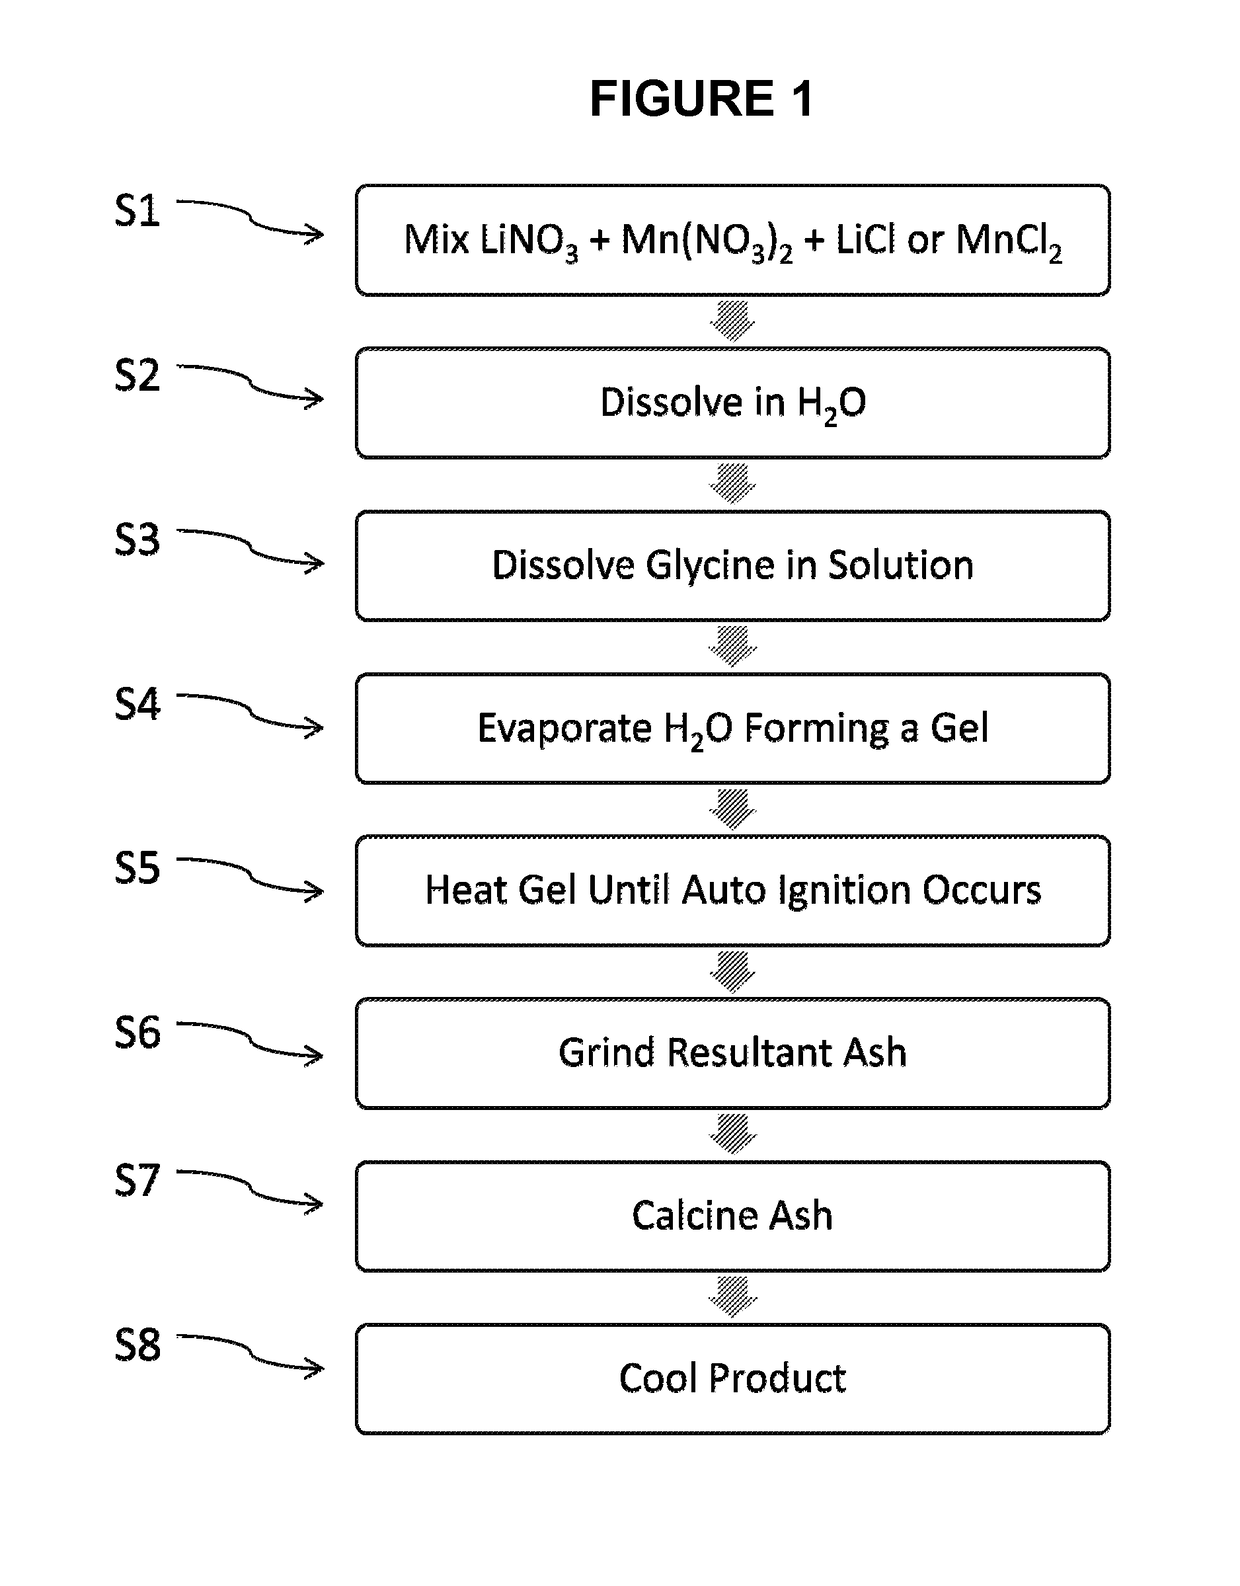 LixMn2O4-y(C1z) spinal cathode material, method of preparing the same, and rechargeable lithium and li-ion electrochemical systems containing the same